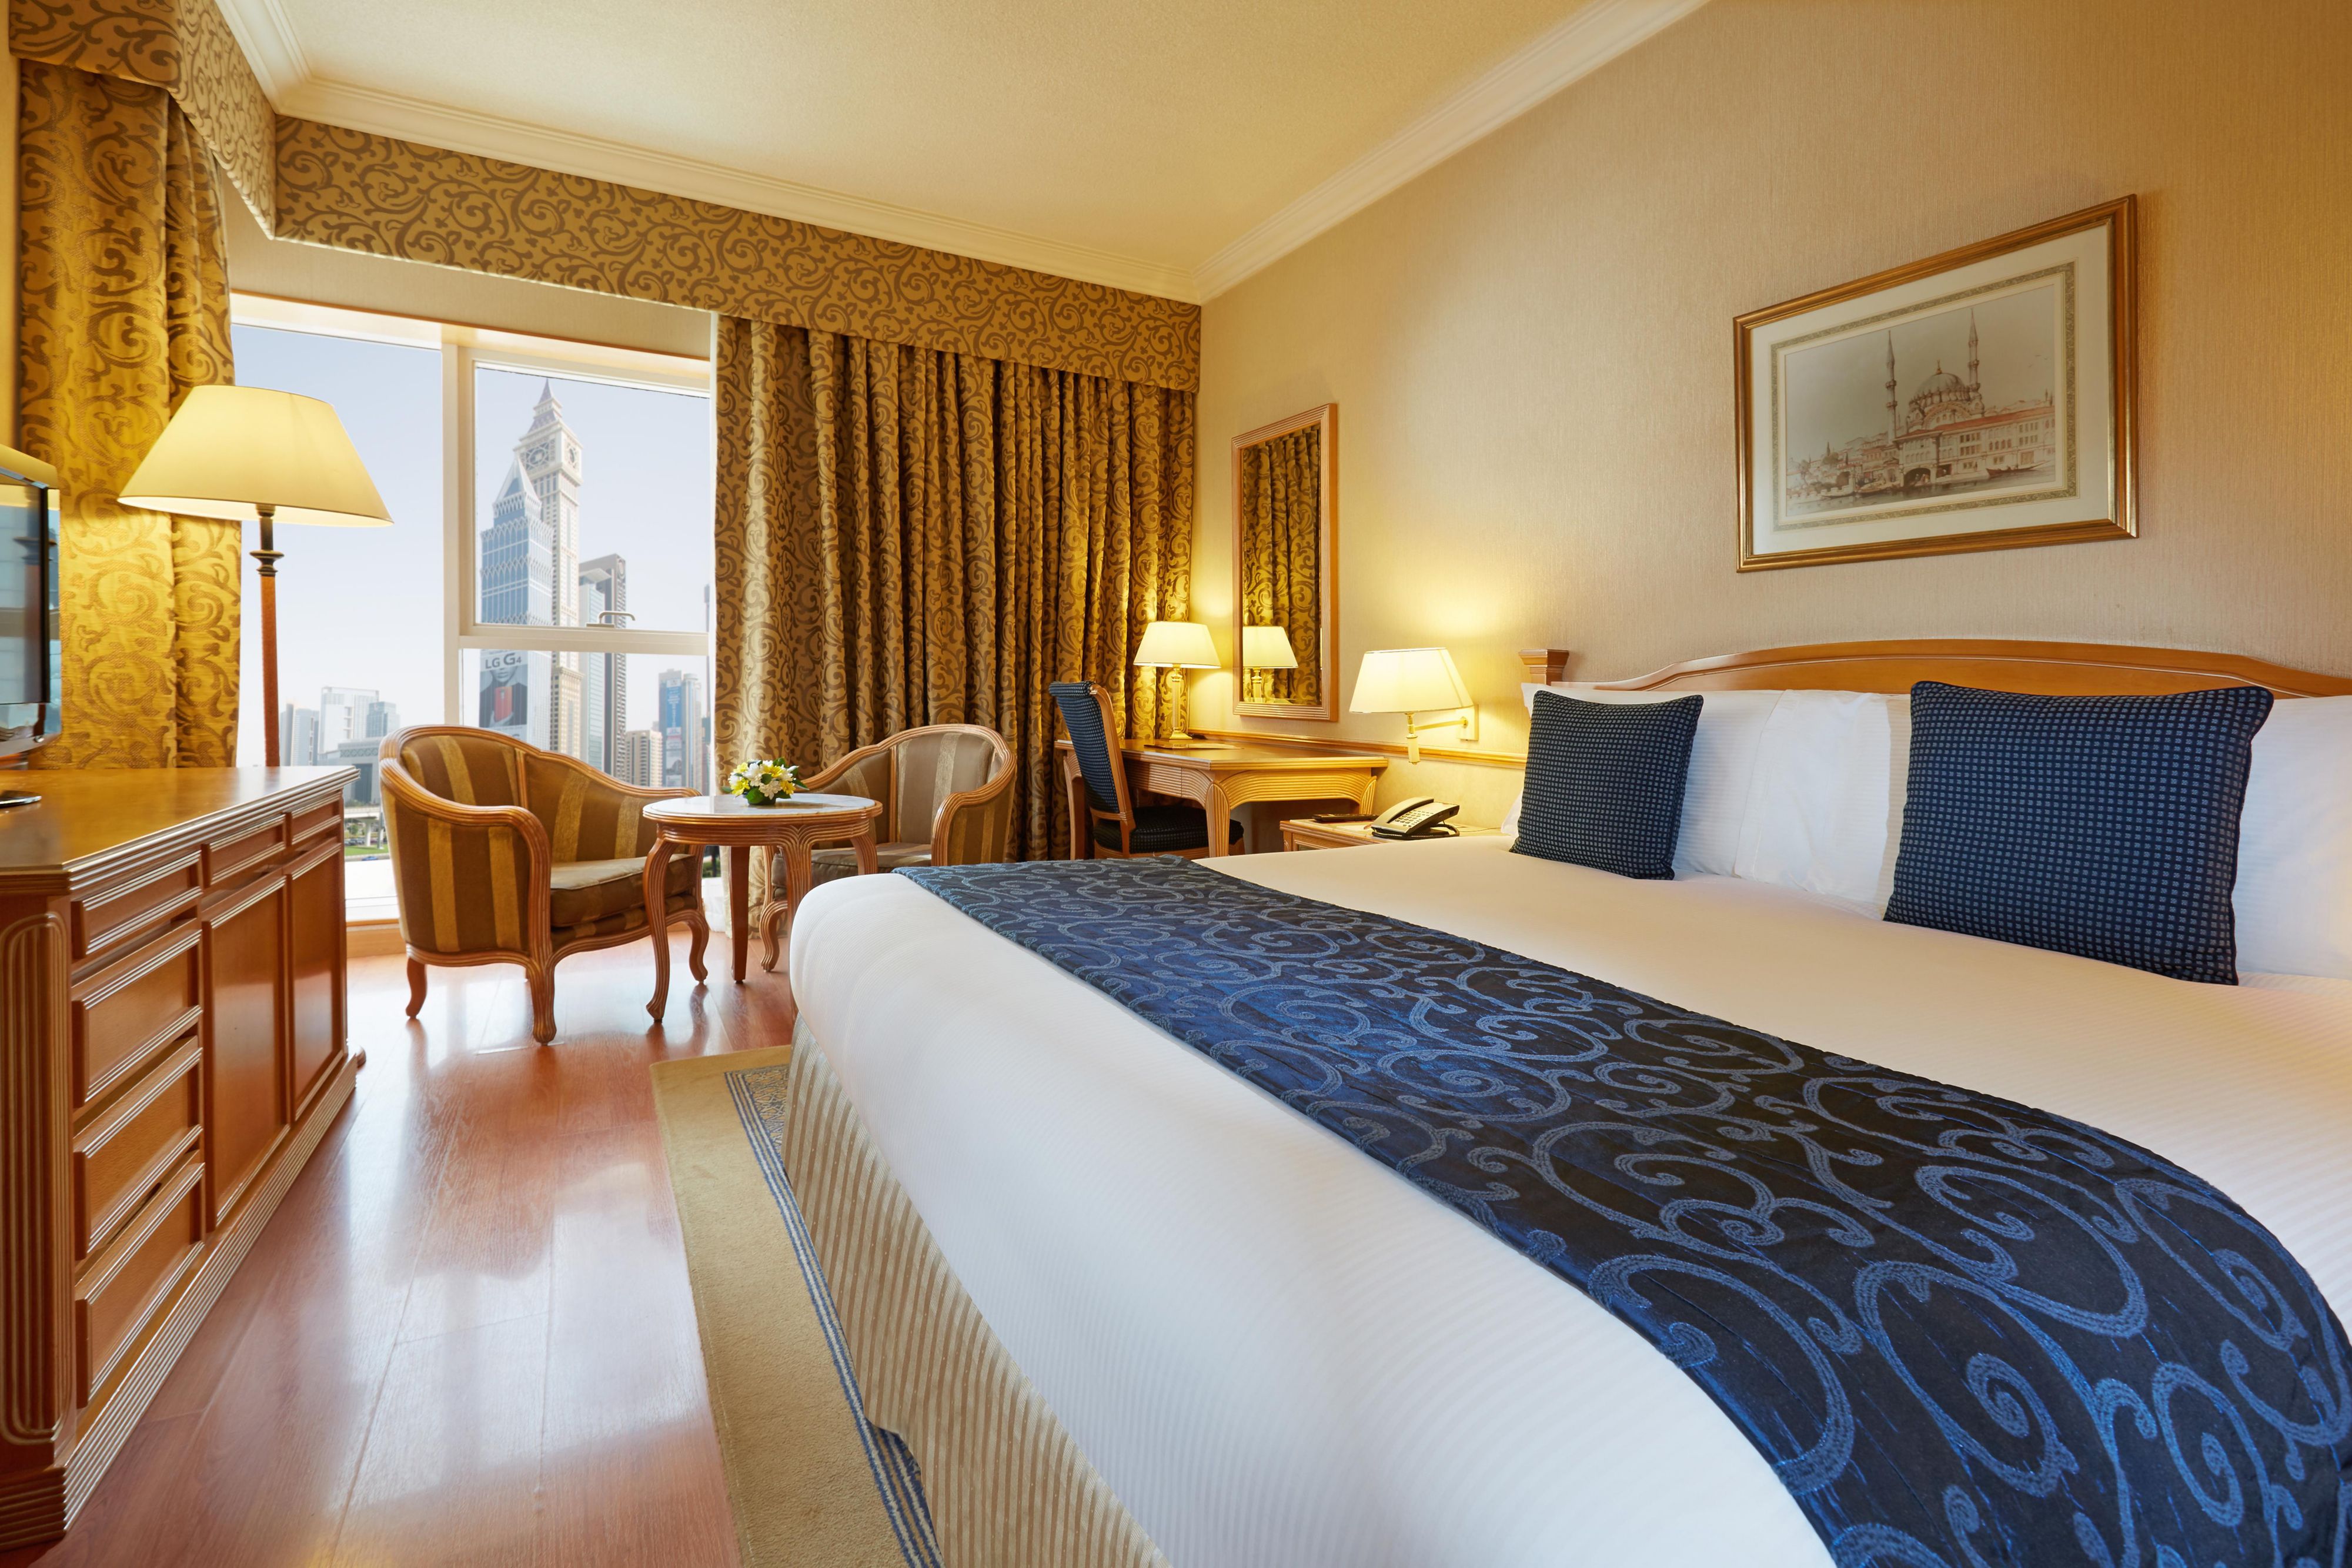 Business guests will find the Deluxe Room suited to their need